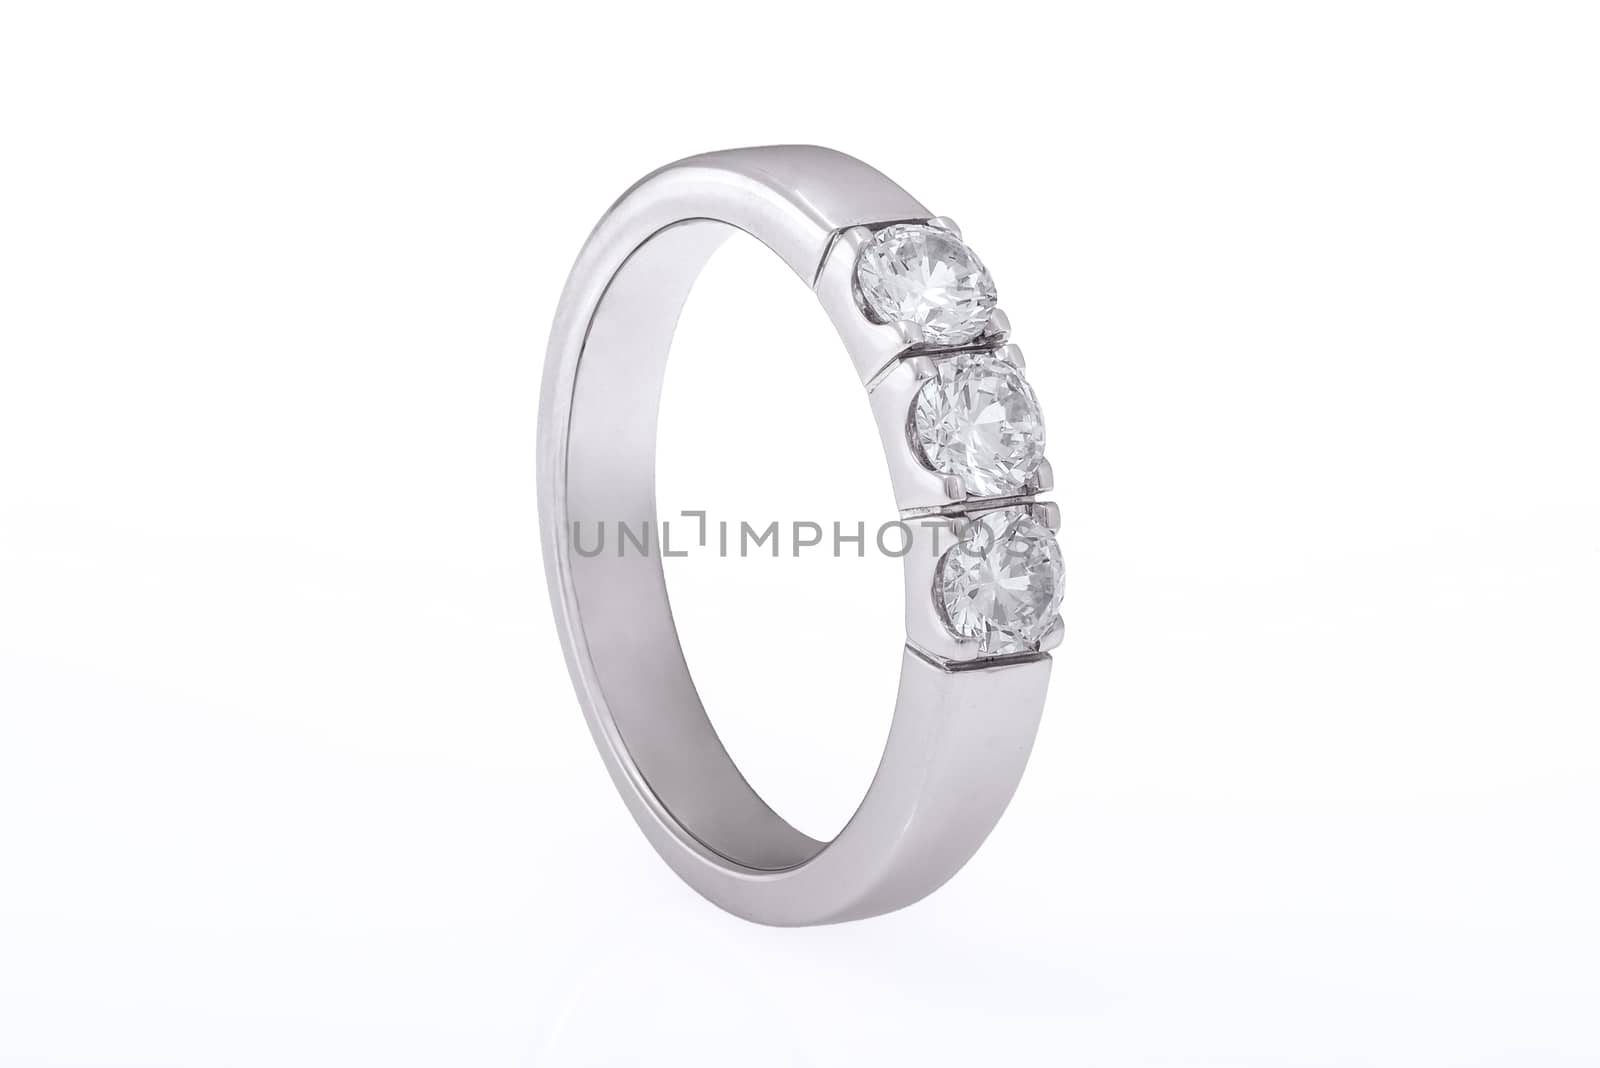 White gold wedding, engagement ring with diamonds by praethip